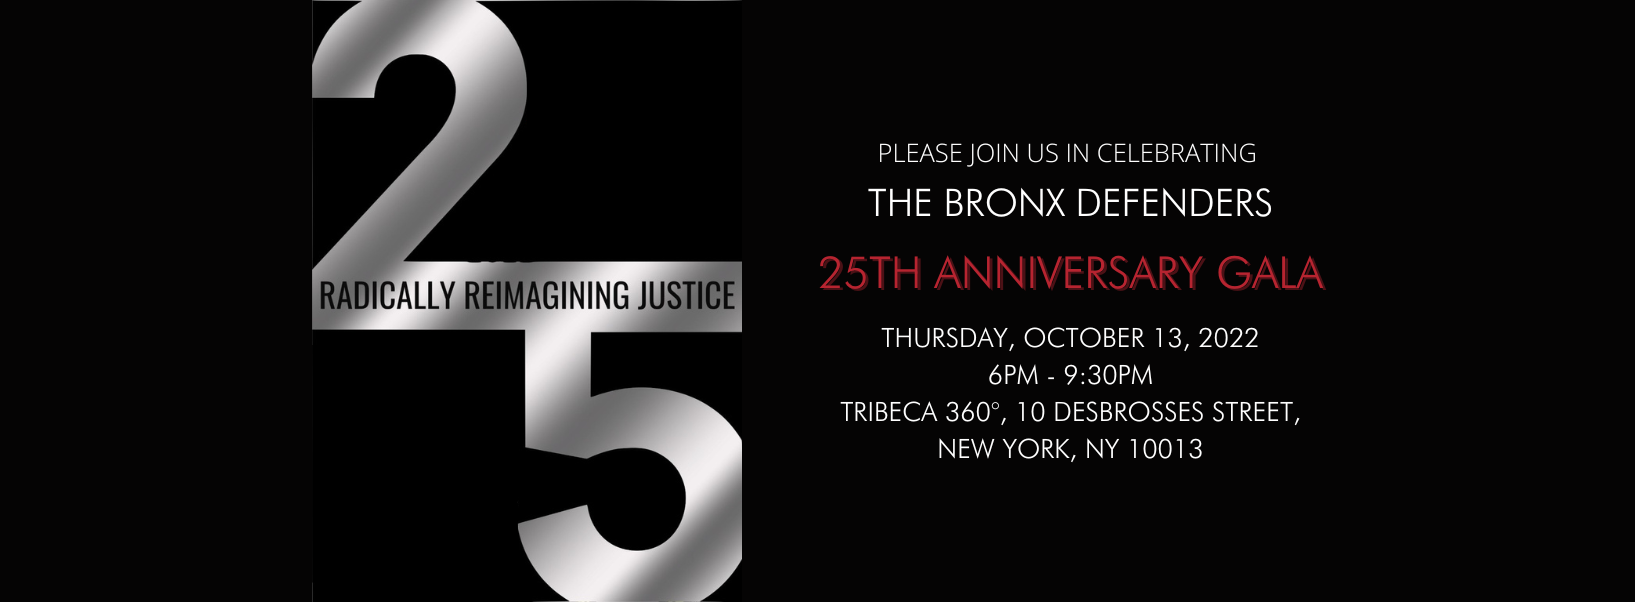 Please join us in celebrating The Bronx Defenders 25th Anniversary Gala; Thursday, October 13, 2022 6 to 9:30PM; Tribeca 360, 10 Desbrosses Street, New York, New York 10013